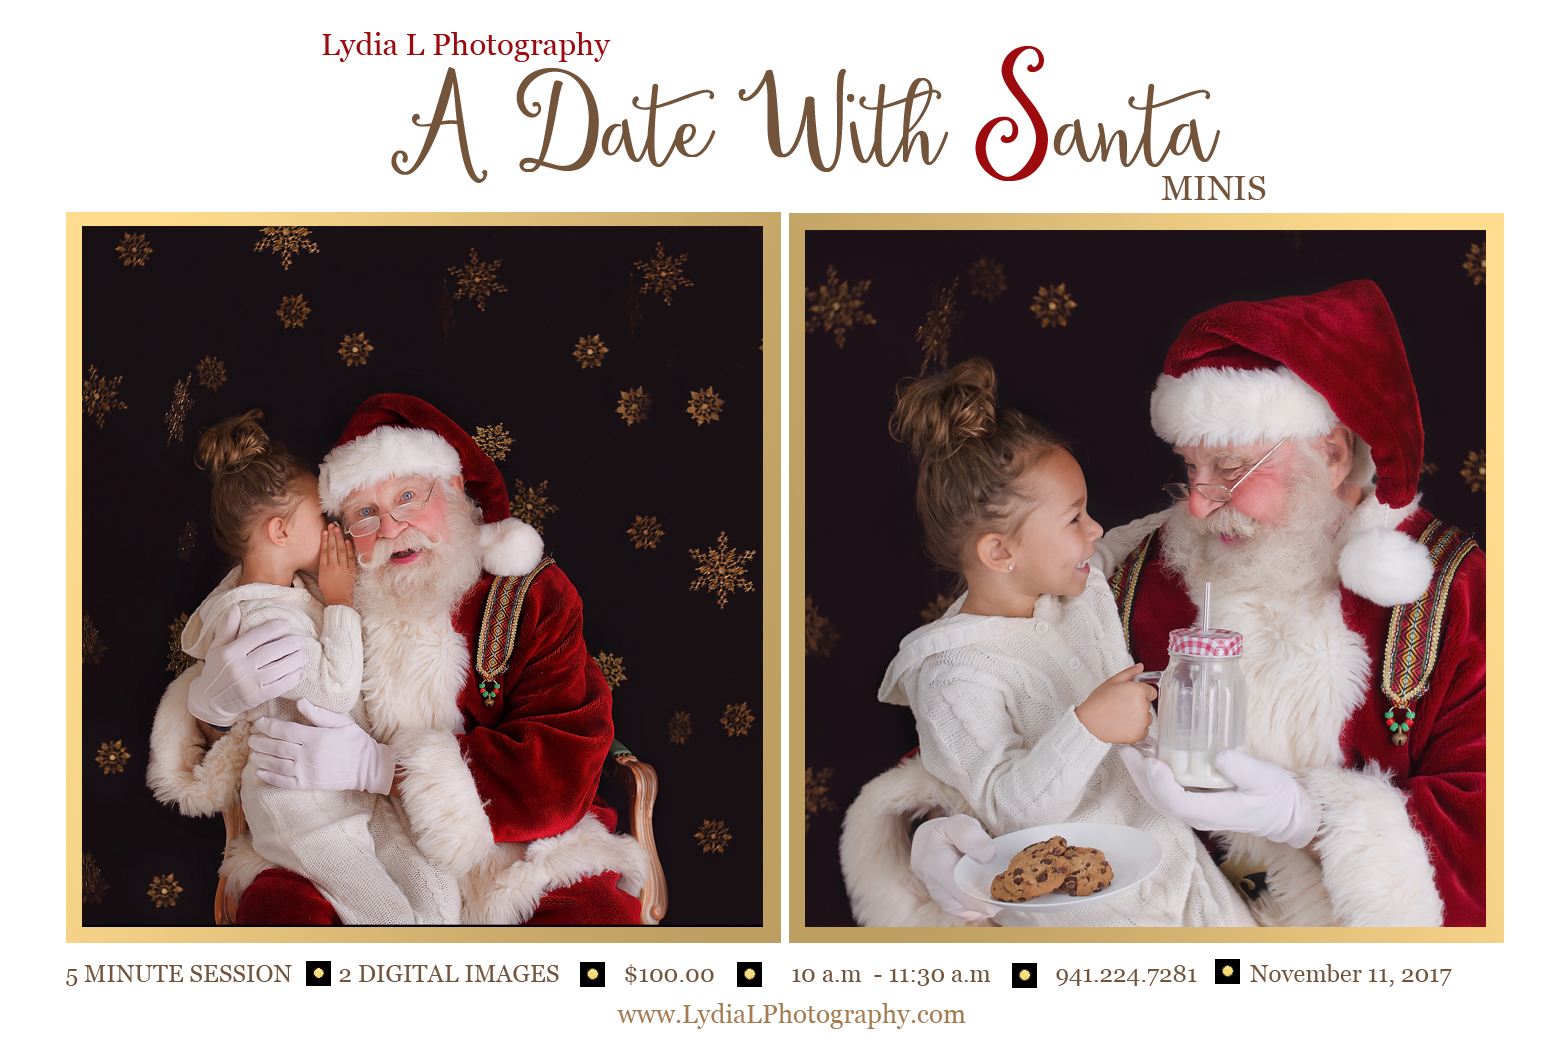 A date with santa to MM Press.jpg